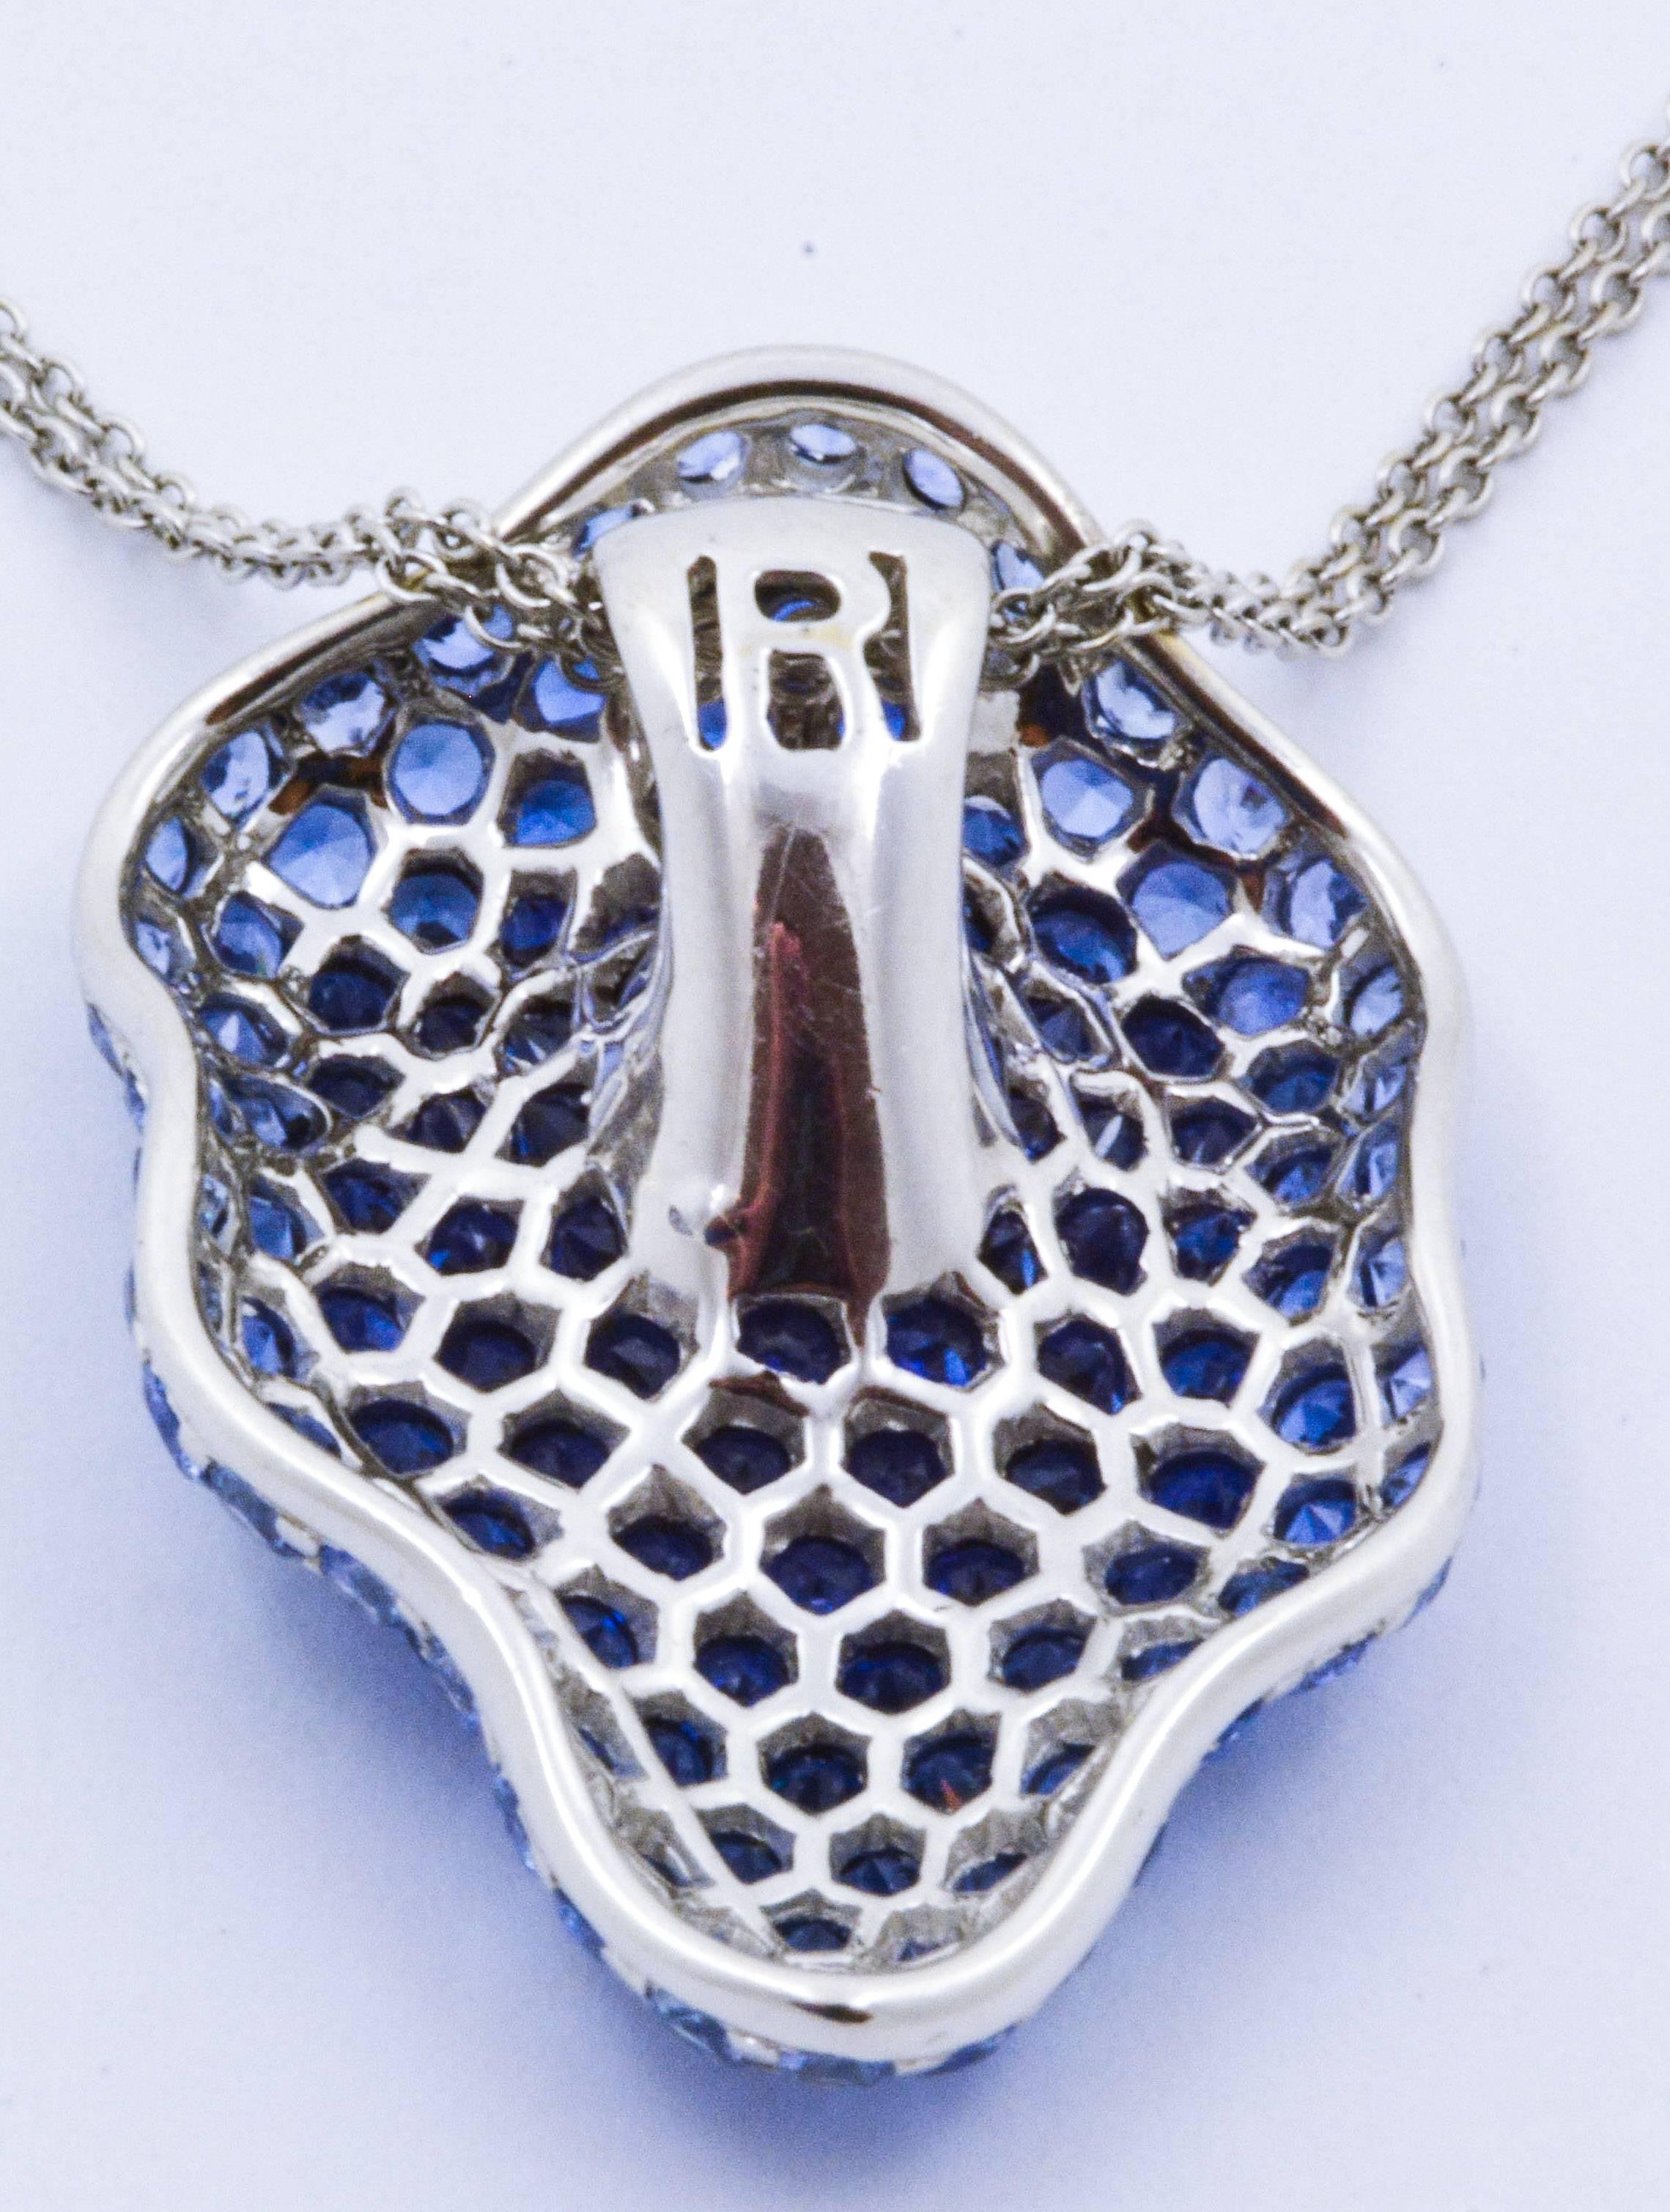 Enhance the neckline with a touch of magnificent blue in this pendant created by Rodney Rayner. 7.40 carats of strikingly beautiful round brilliant cut sapphires flow flawlessly over a contoured surface, creating a sparkling and organic piece of art